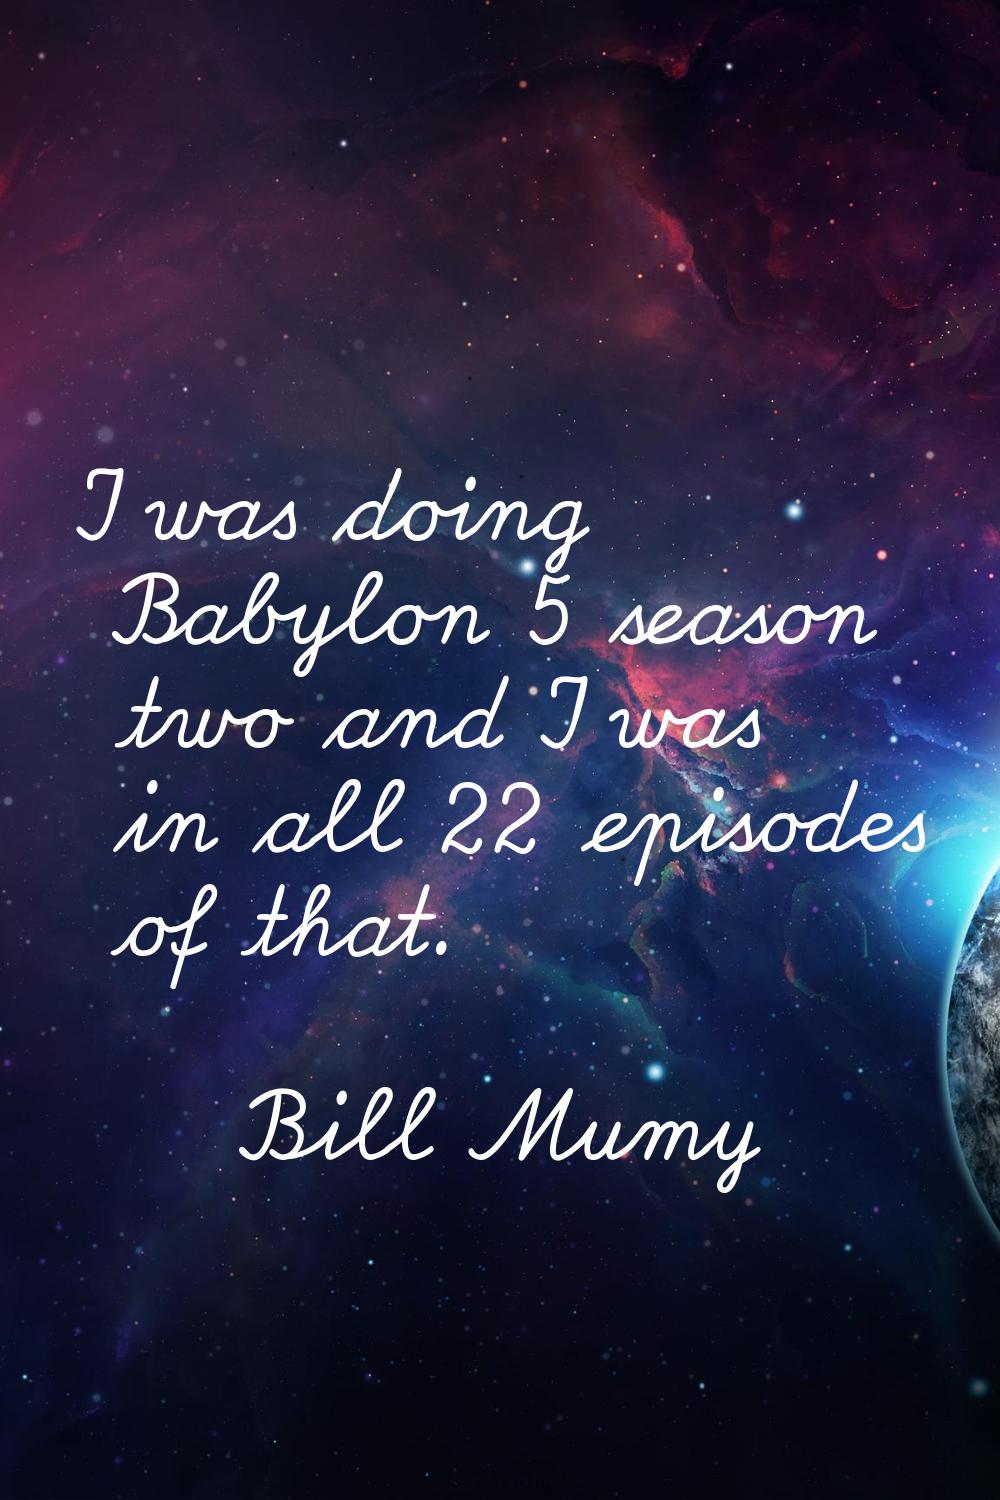 I was doing Babylon 5 season two and I was in all 22 episodes of that.